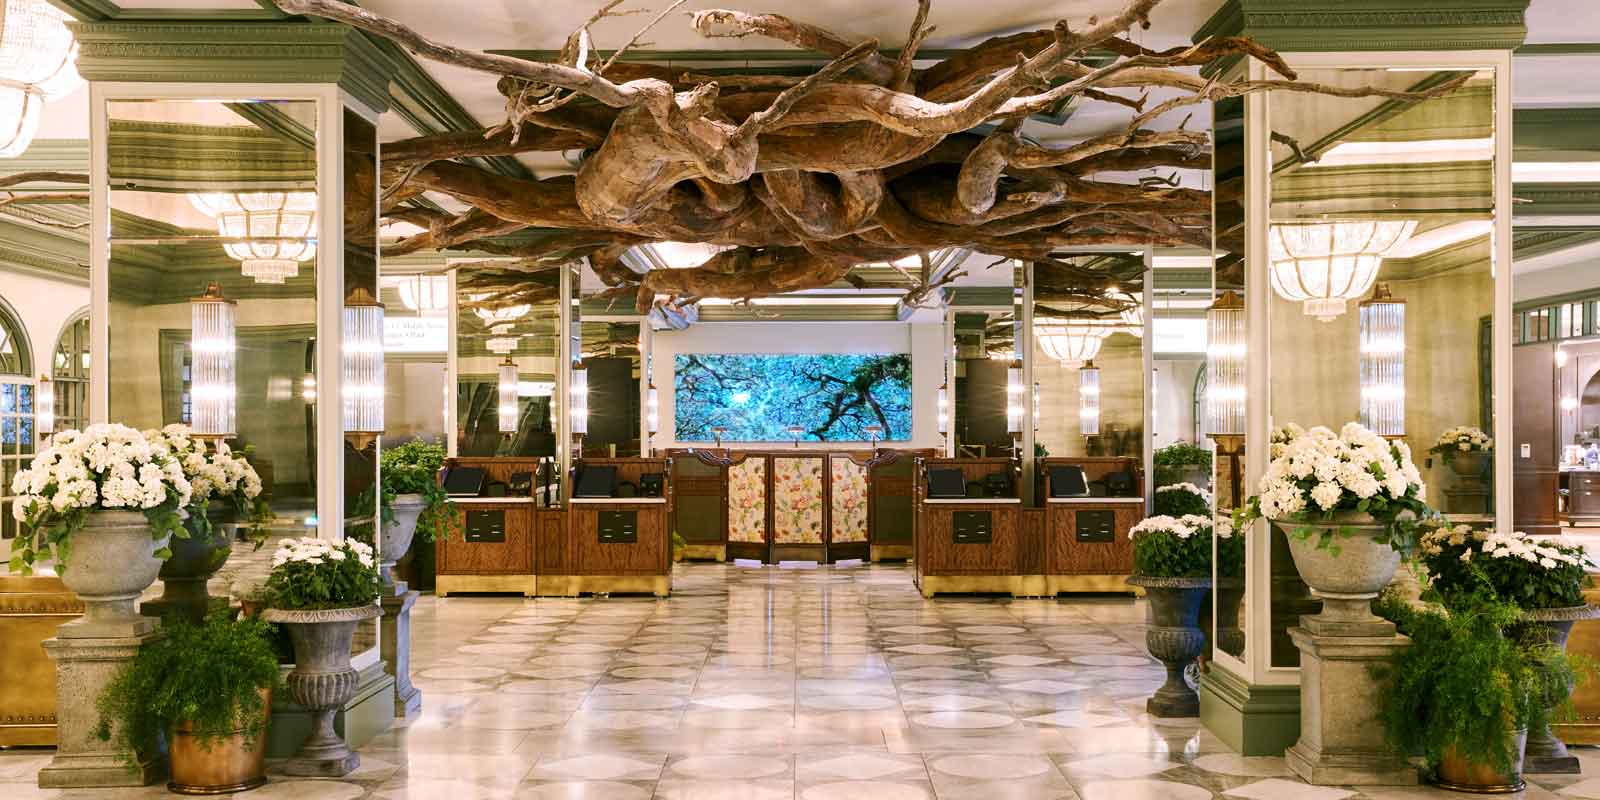 Landscape view of the hotel lobby at Park MGM with plants, white potted flowers, and a ceiling sculpture that resembles tree roots.